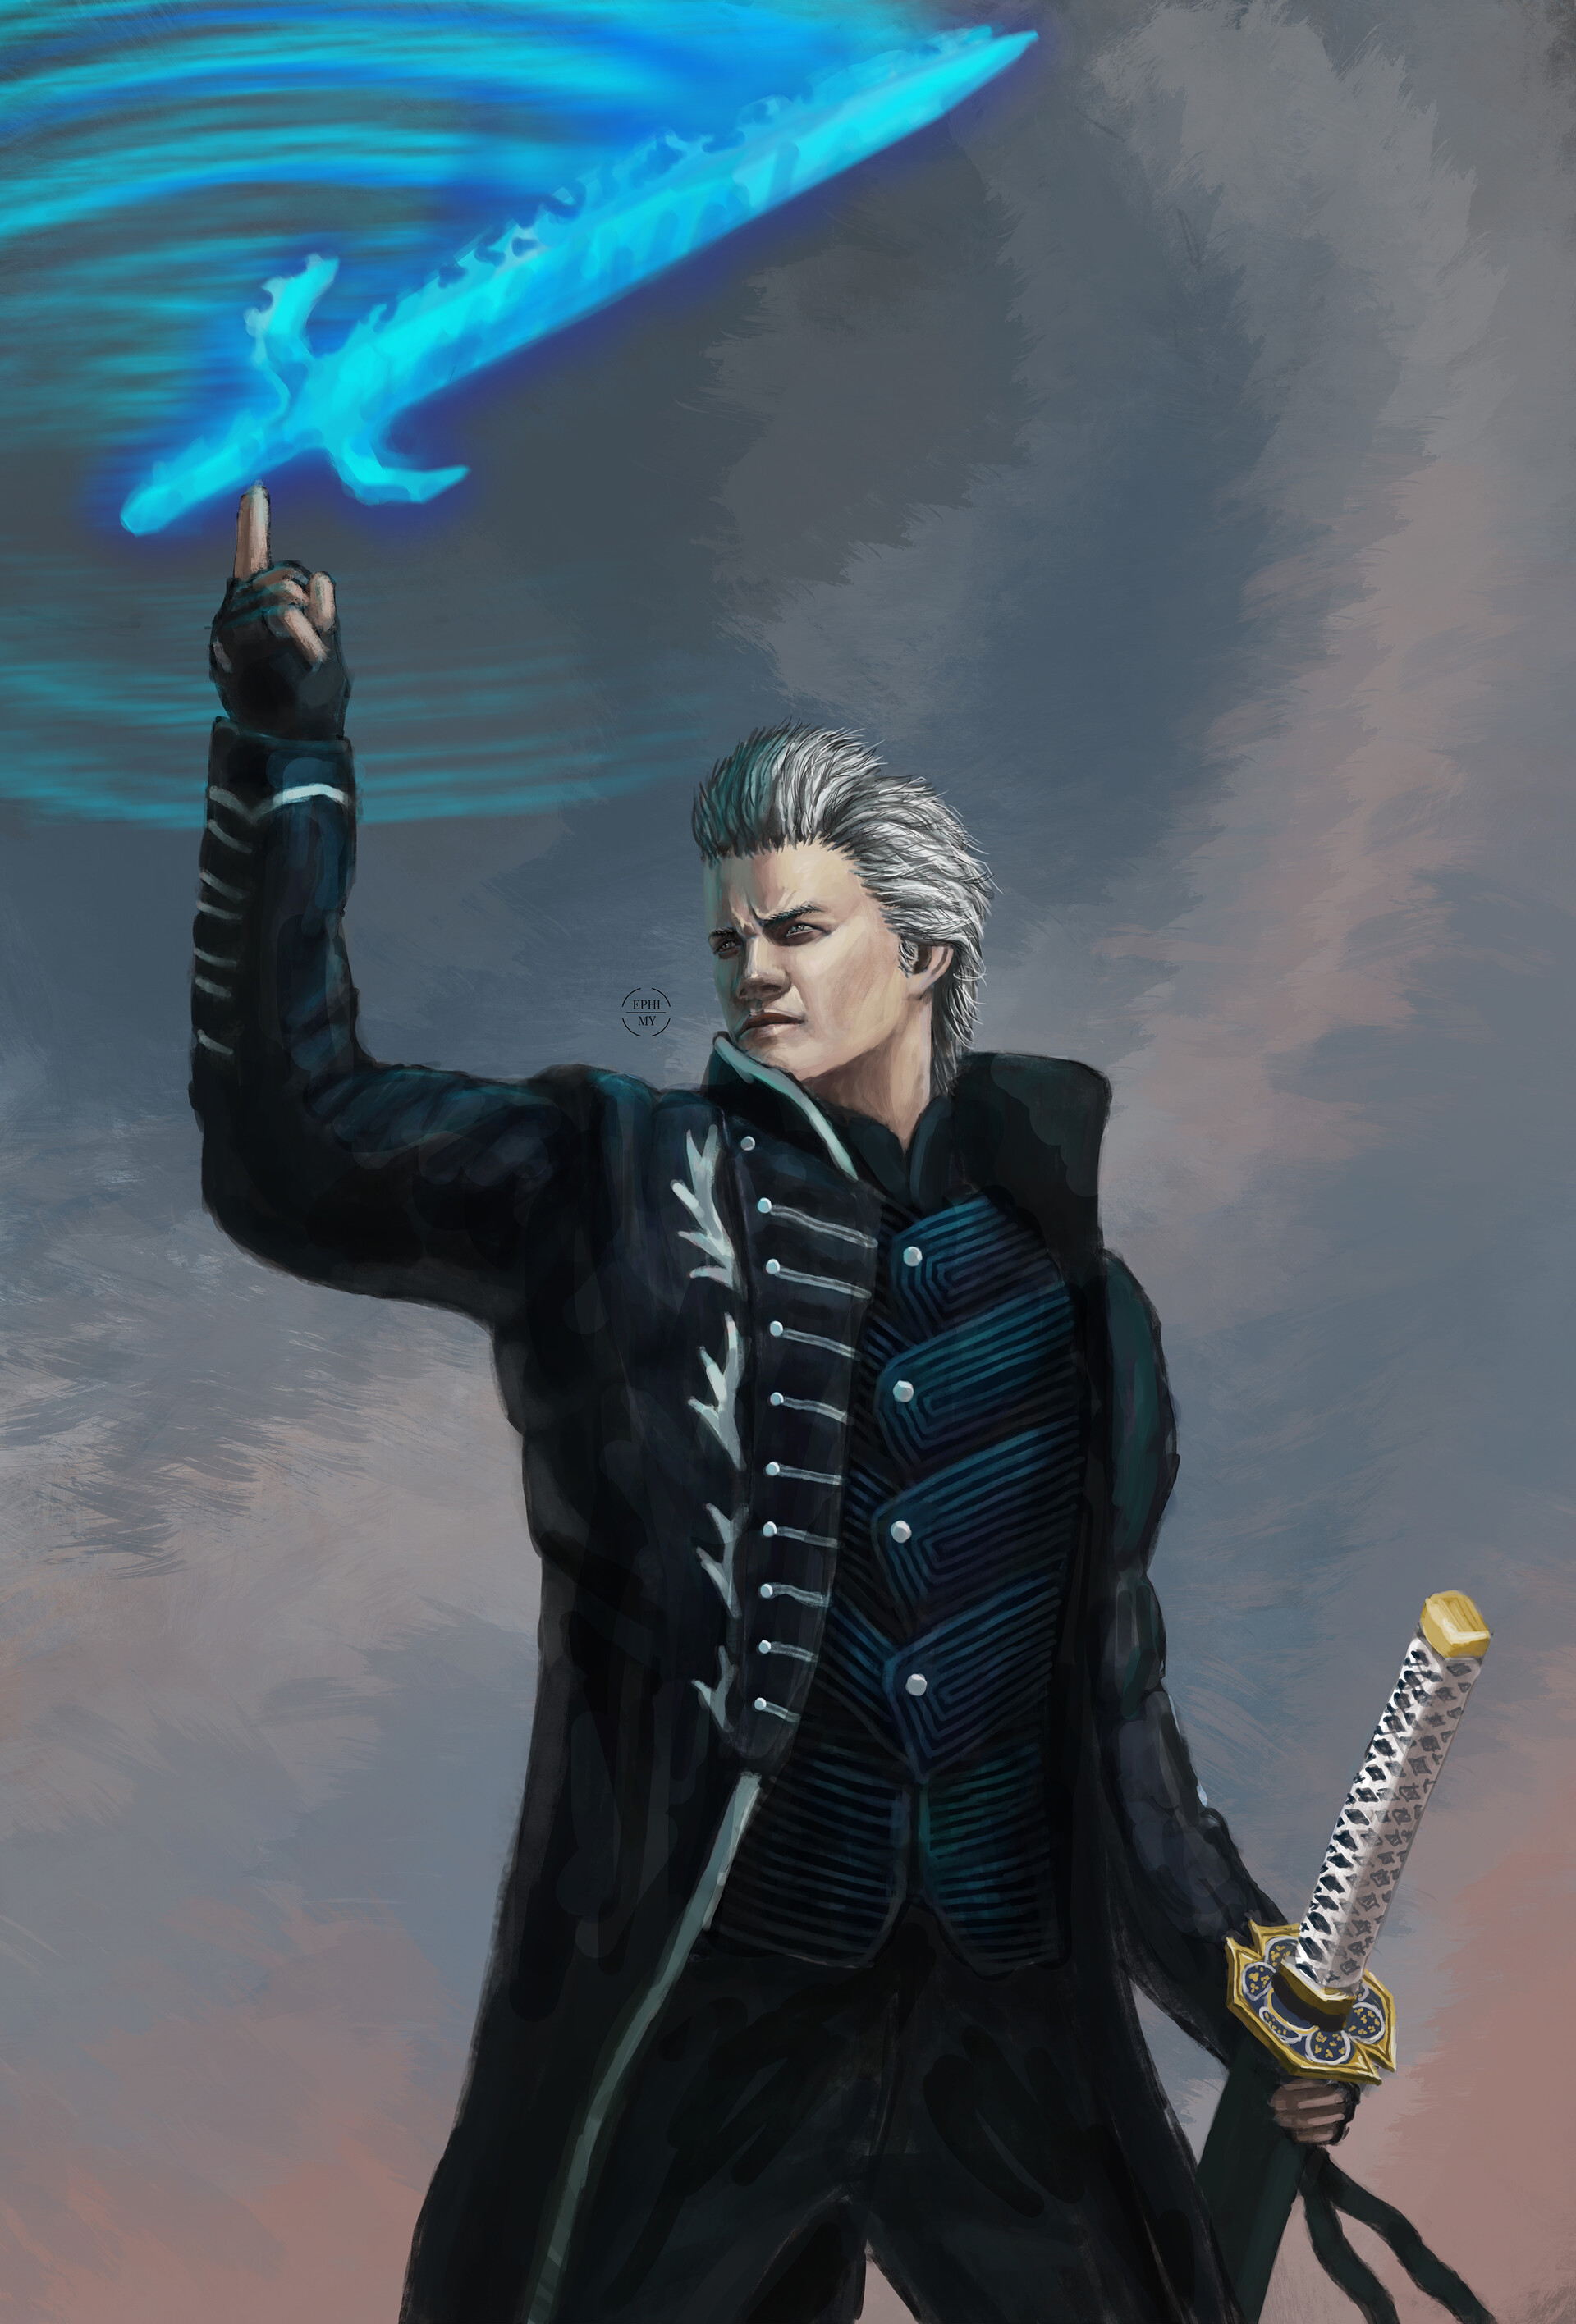 Main Characters Illustration - Devil May Cry 5 Art Gallery